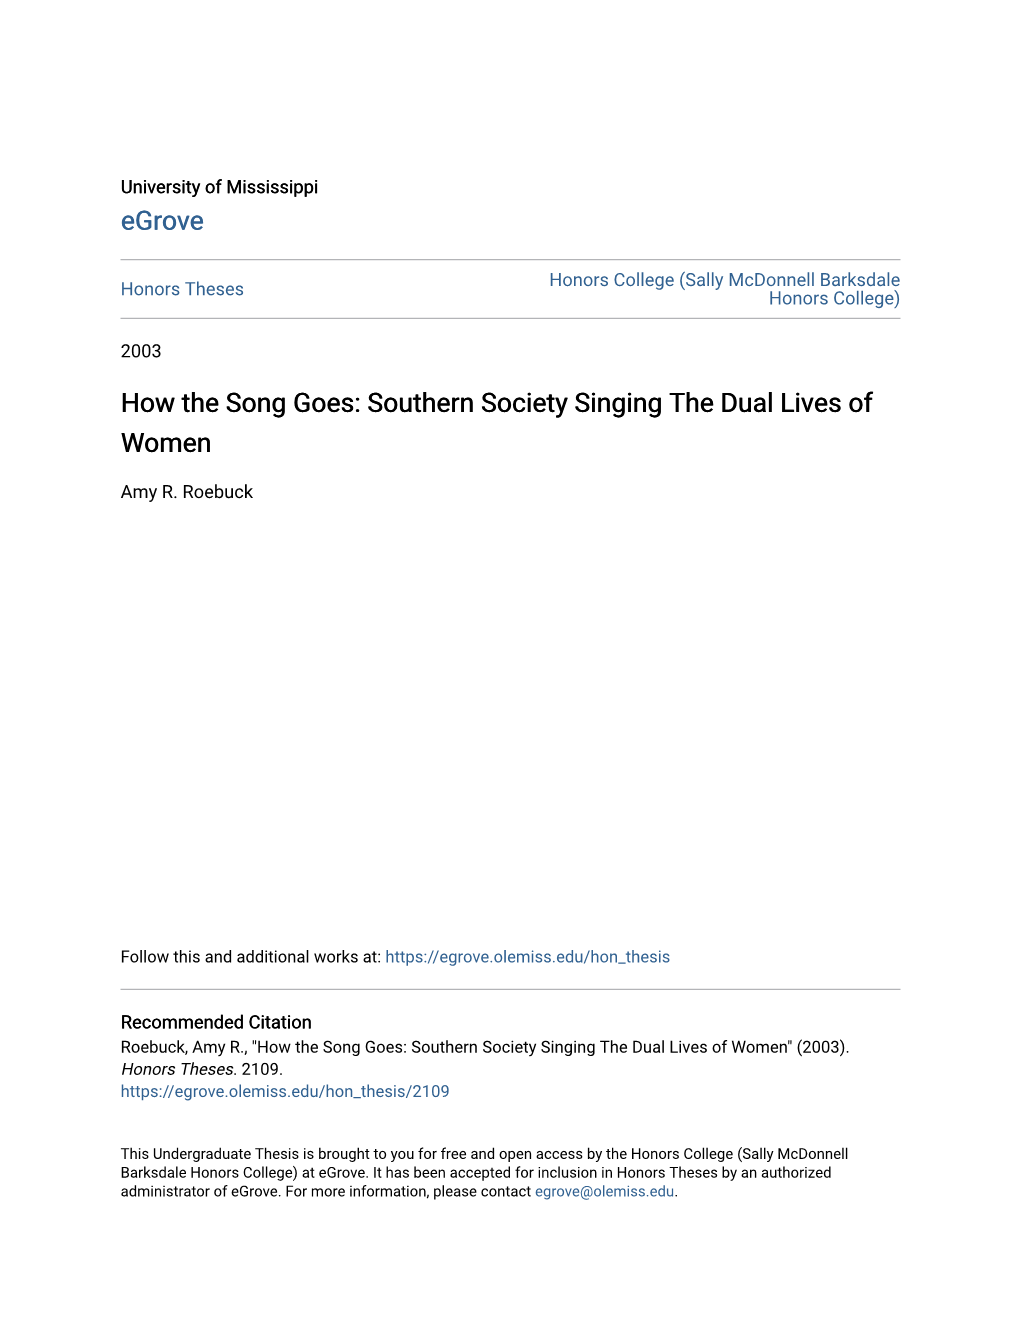 How the Song Goes: Southern Society Singing the Dual Lives of Women